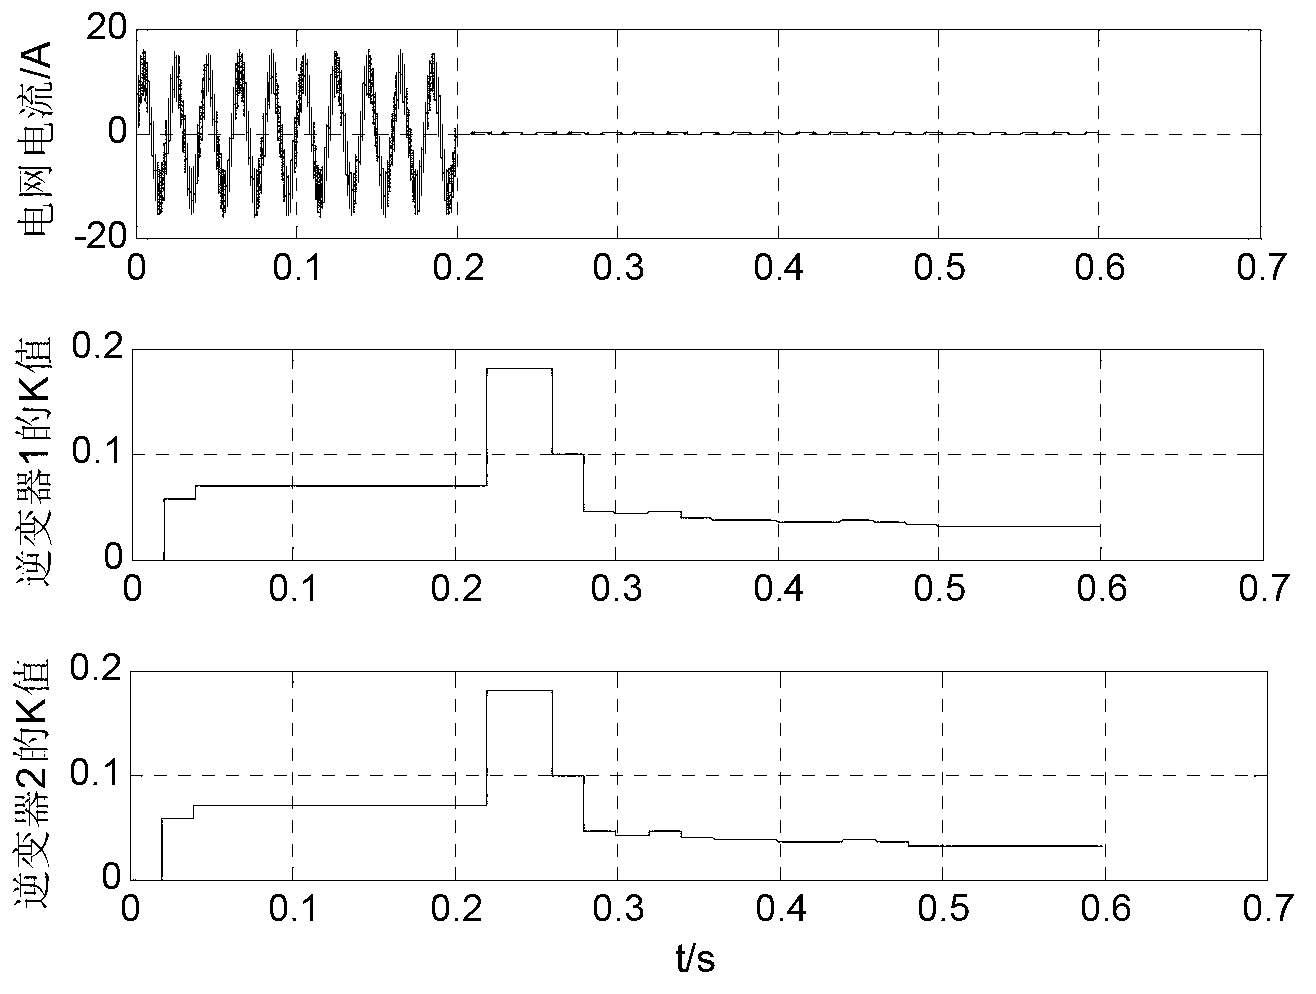 Grid-connected inverter island detection method based on parameter adaptive Sandia frequency shift (SFS)